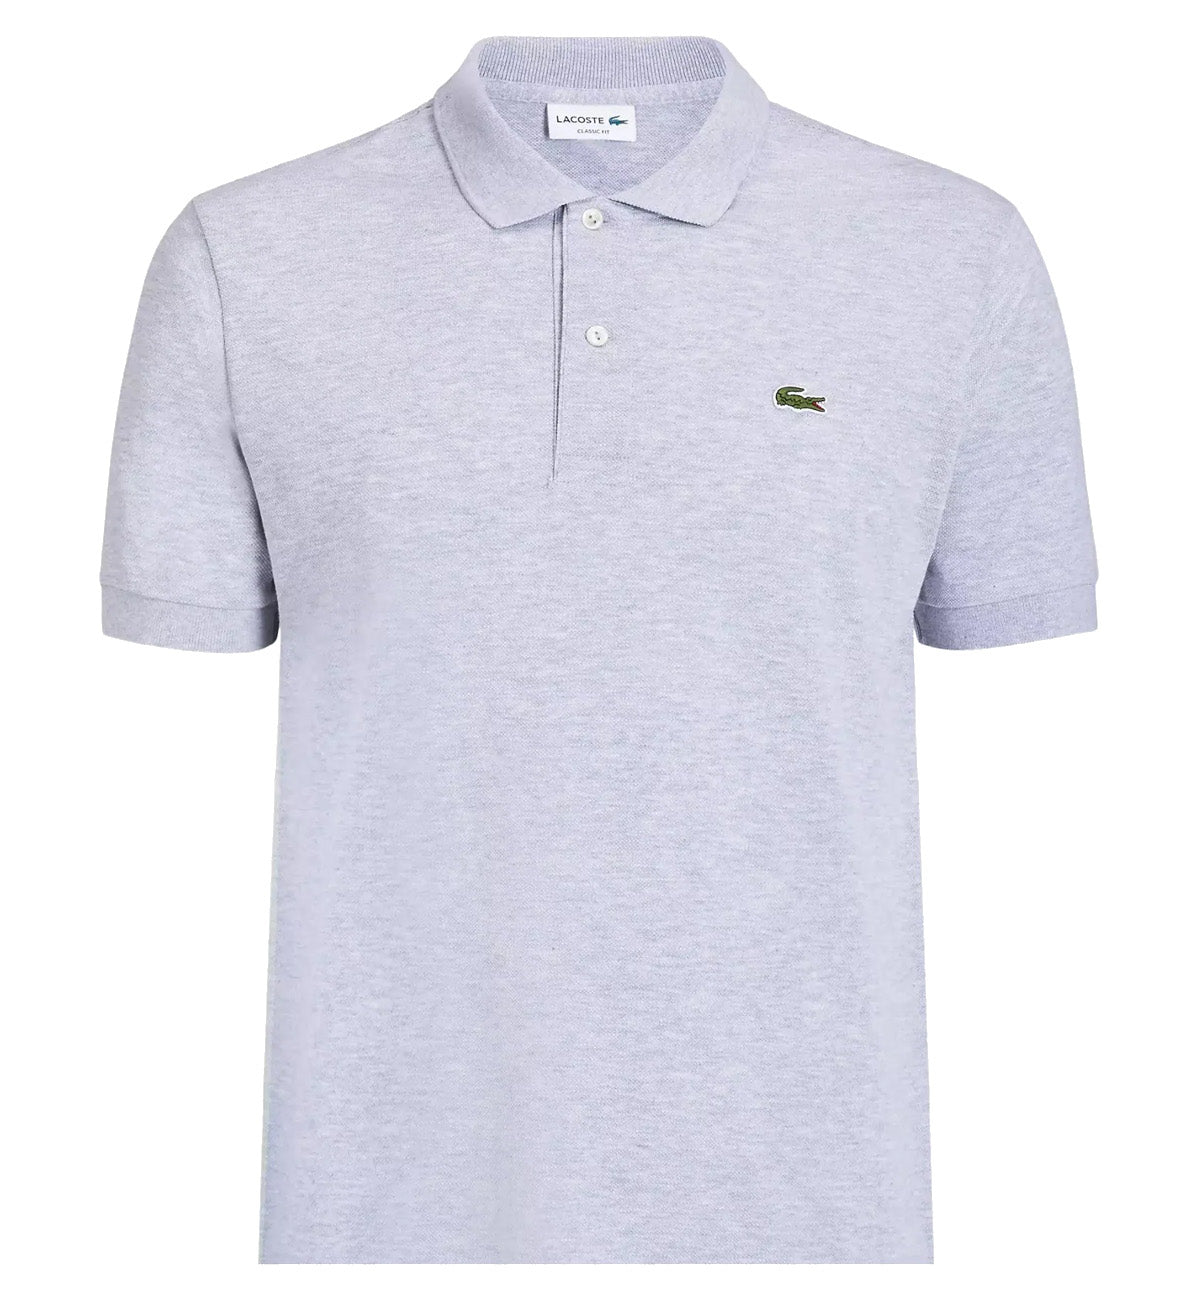 Lacoste Classic Fit Cotton Polo Shirt (Grey)